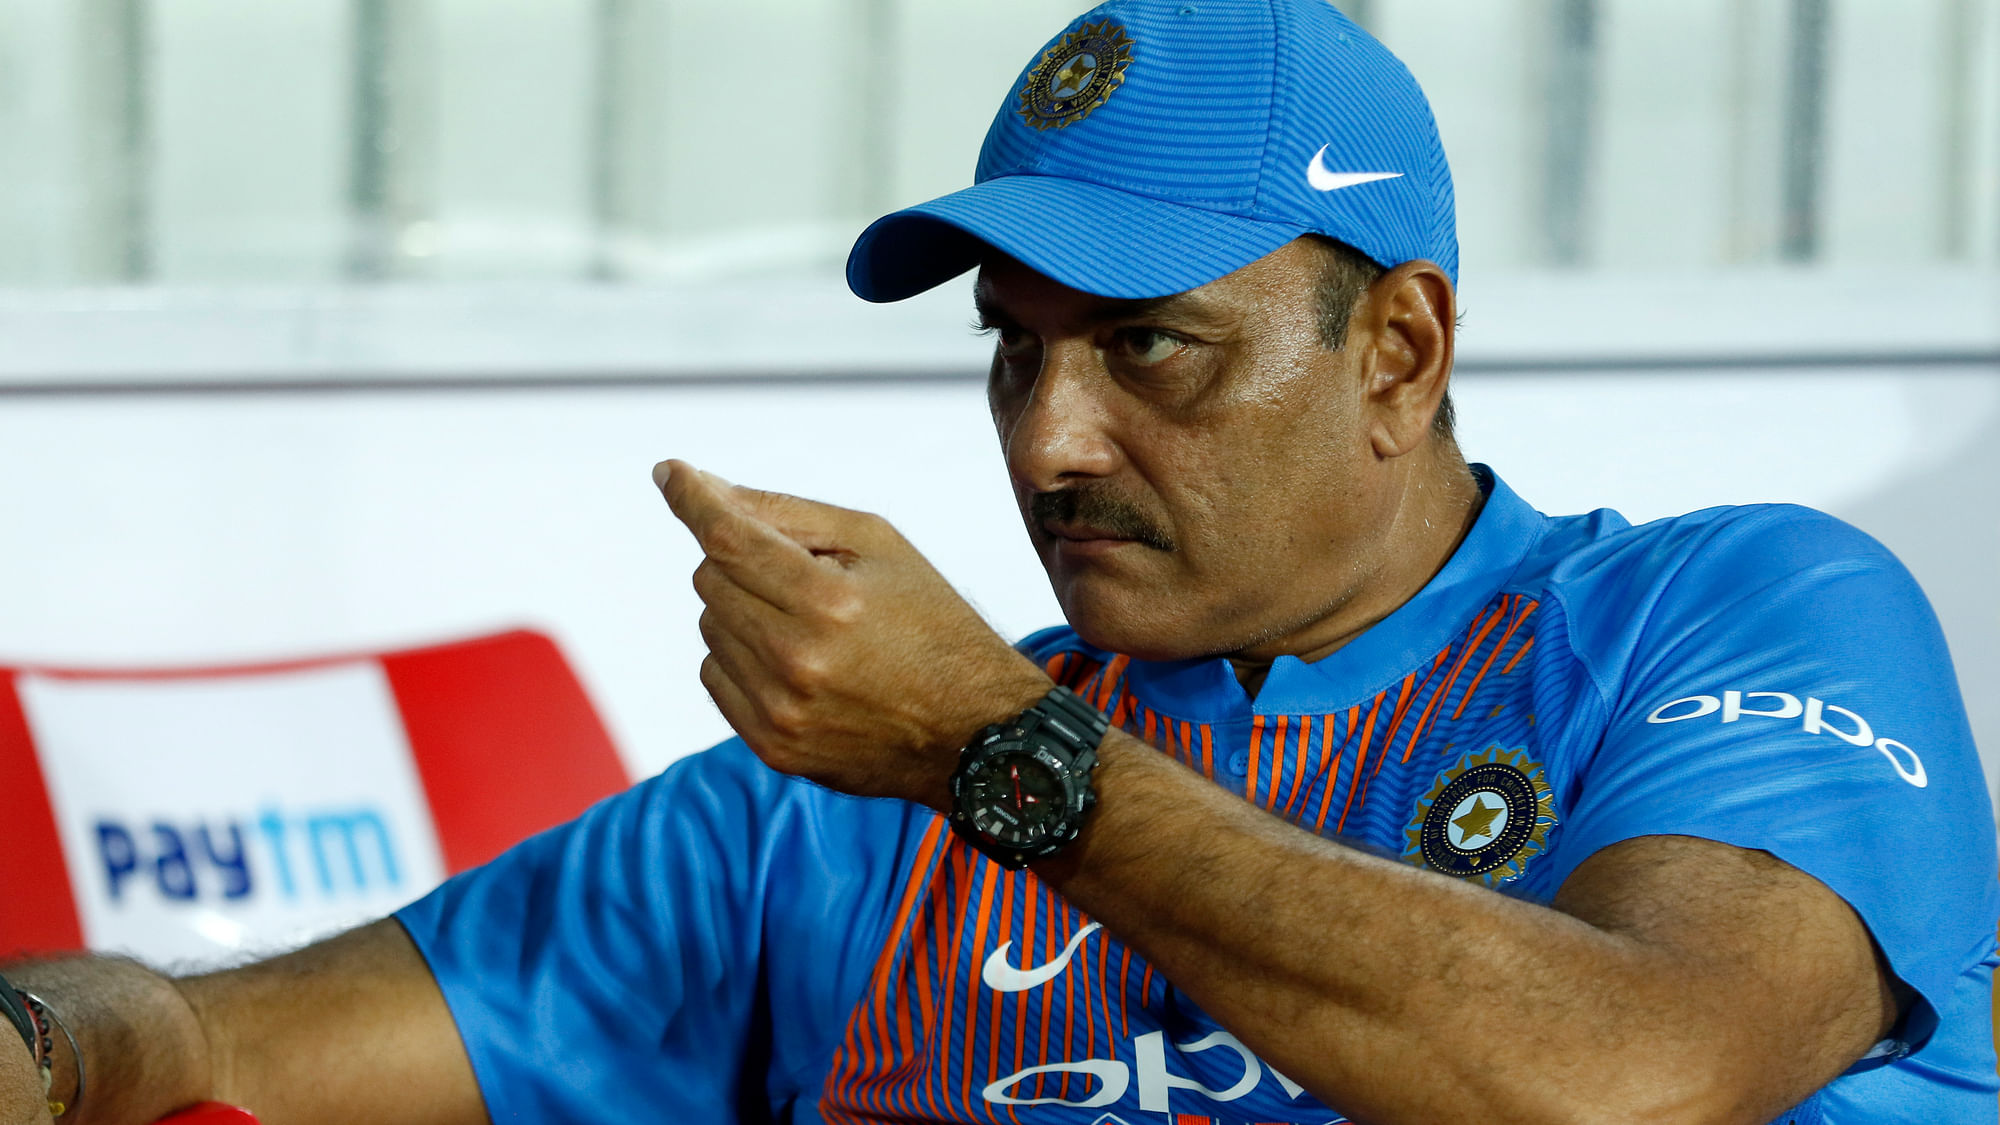 Ravi Shastri has been put in a spot after making an obscene comment during a live broadcast.